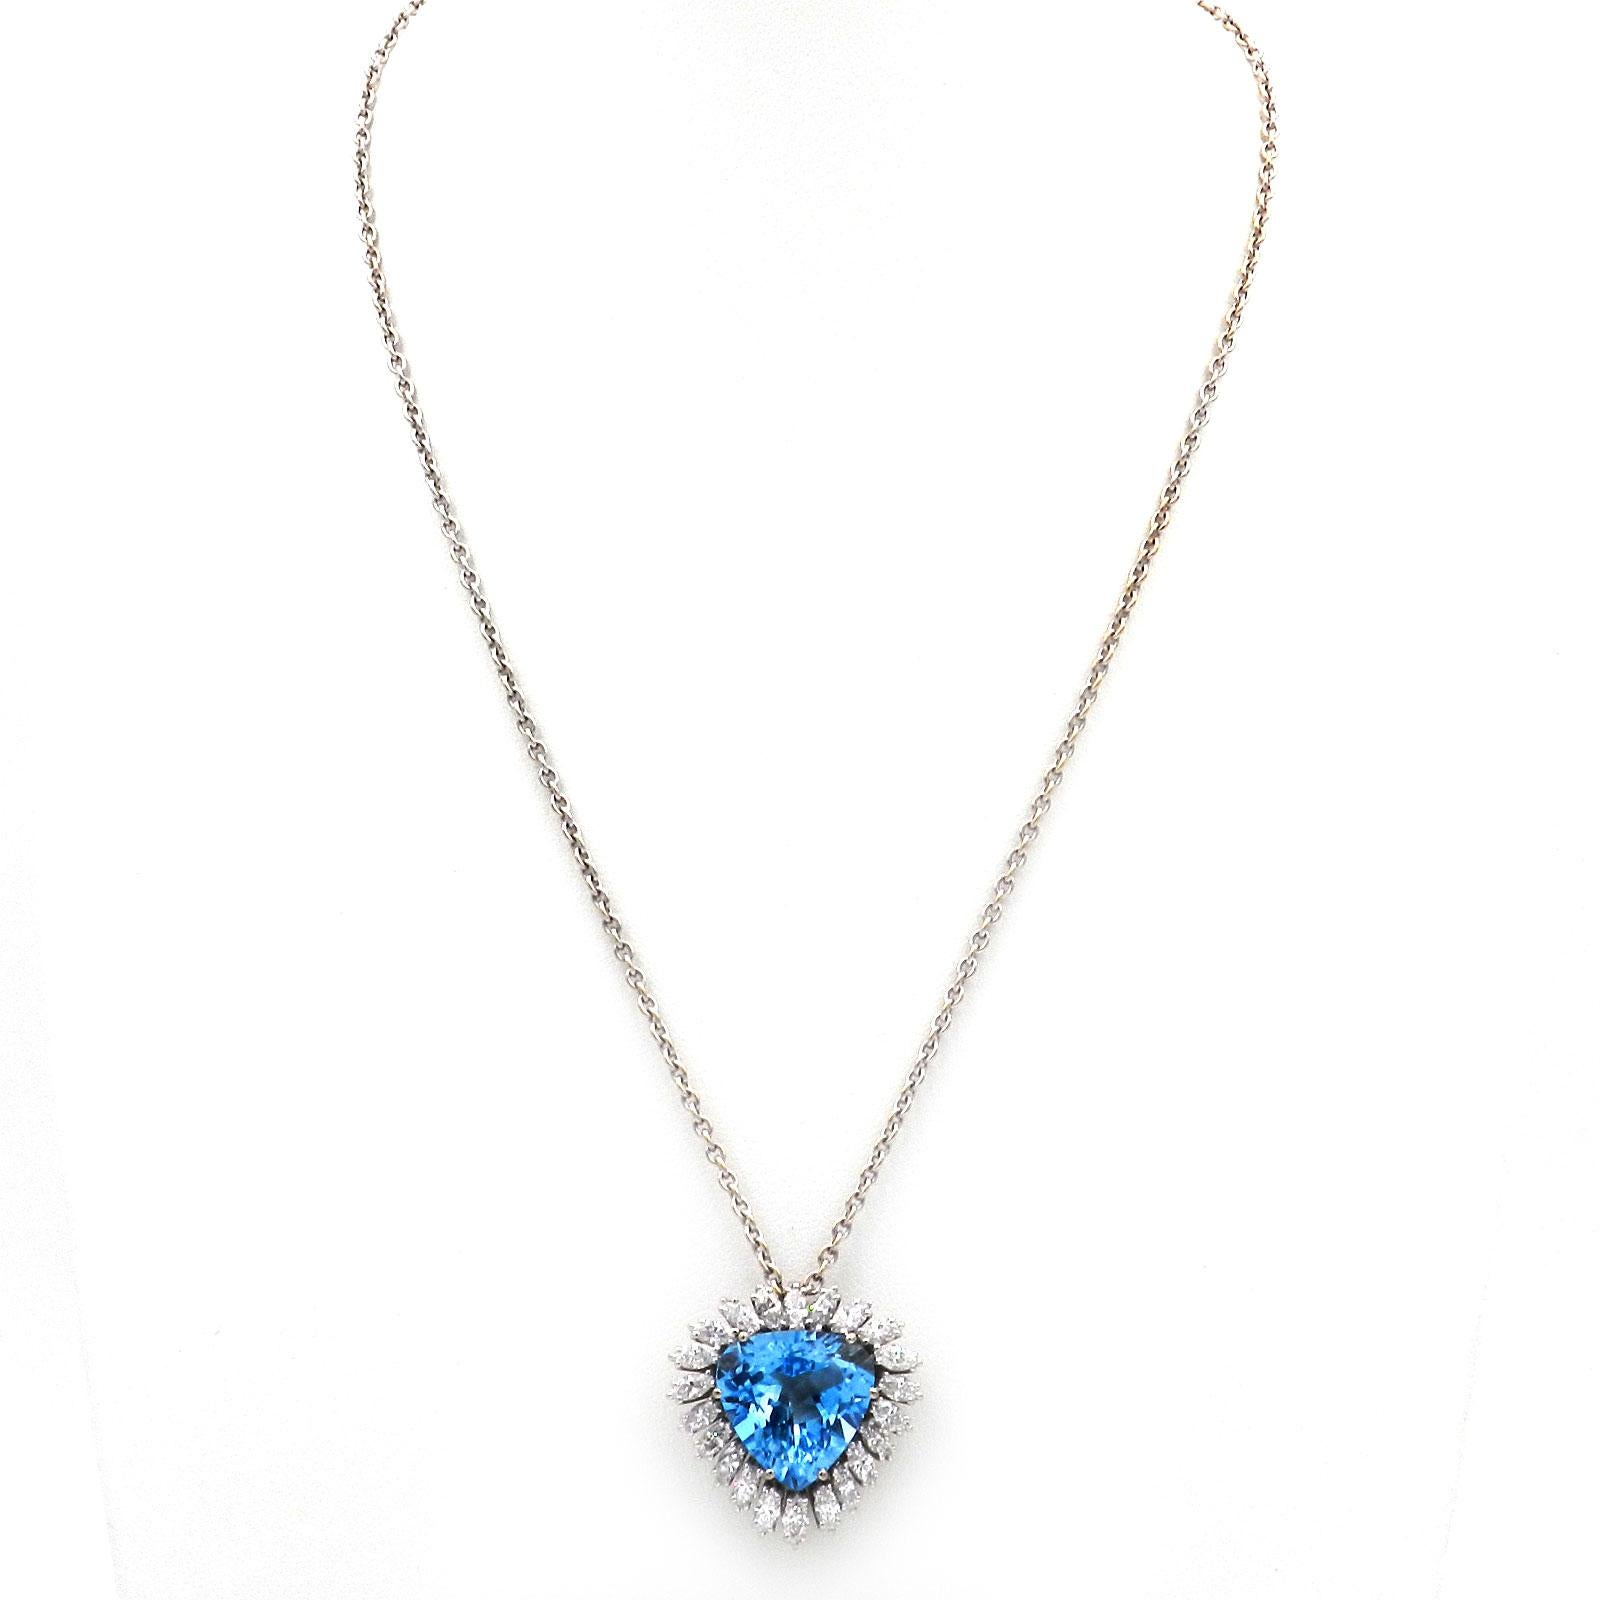 8.5 Carat Aquamarine and 1.76 Carat Diamond 18K White Gold Pendant Necklace

Magnificent pendant handcrafted by the well-known Stuttgart jeweler Schilling in the finest 18K white gold, set with a natural aquamarine 8.5 ct of intense water-blue